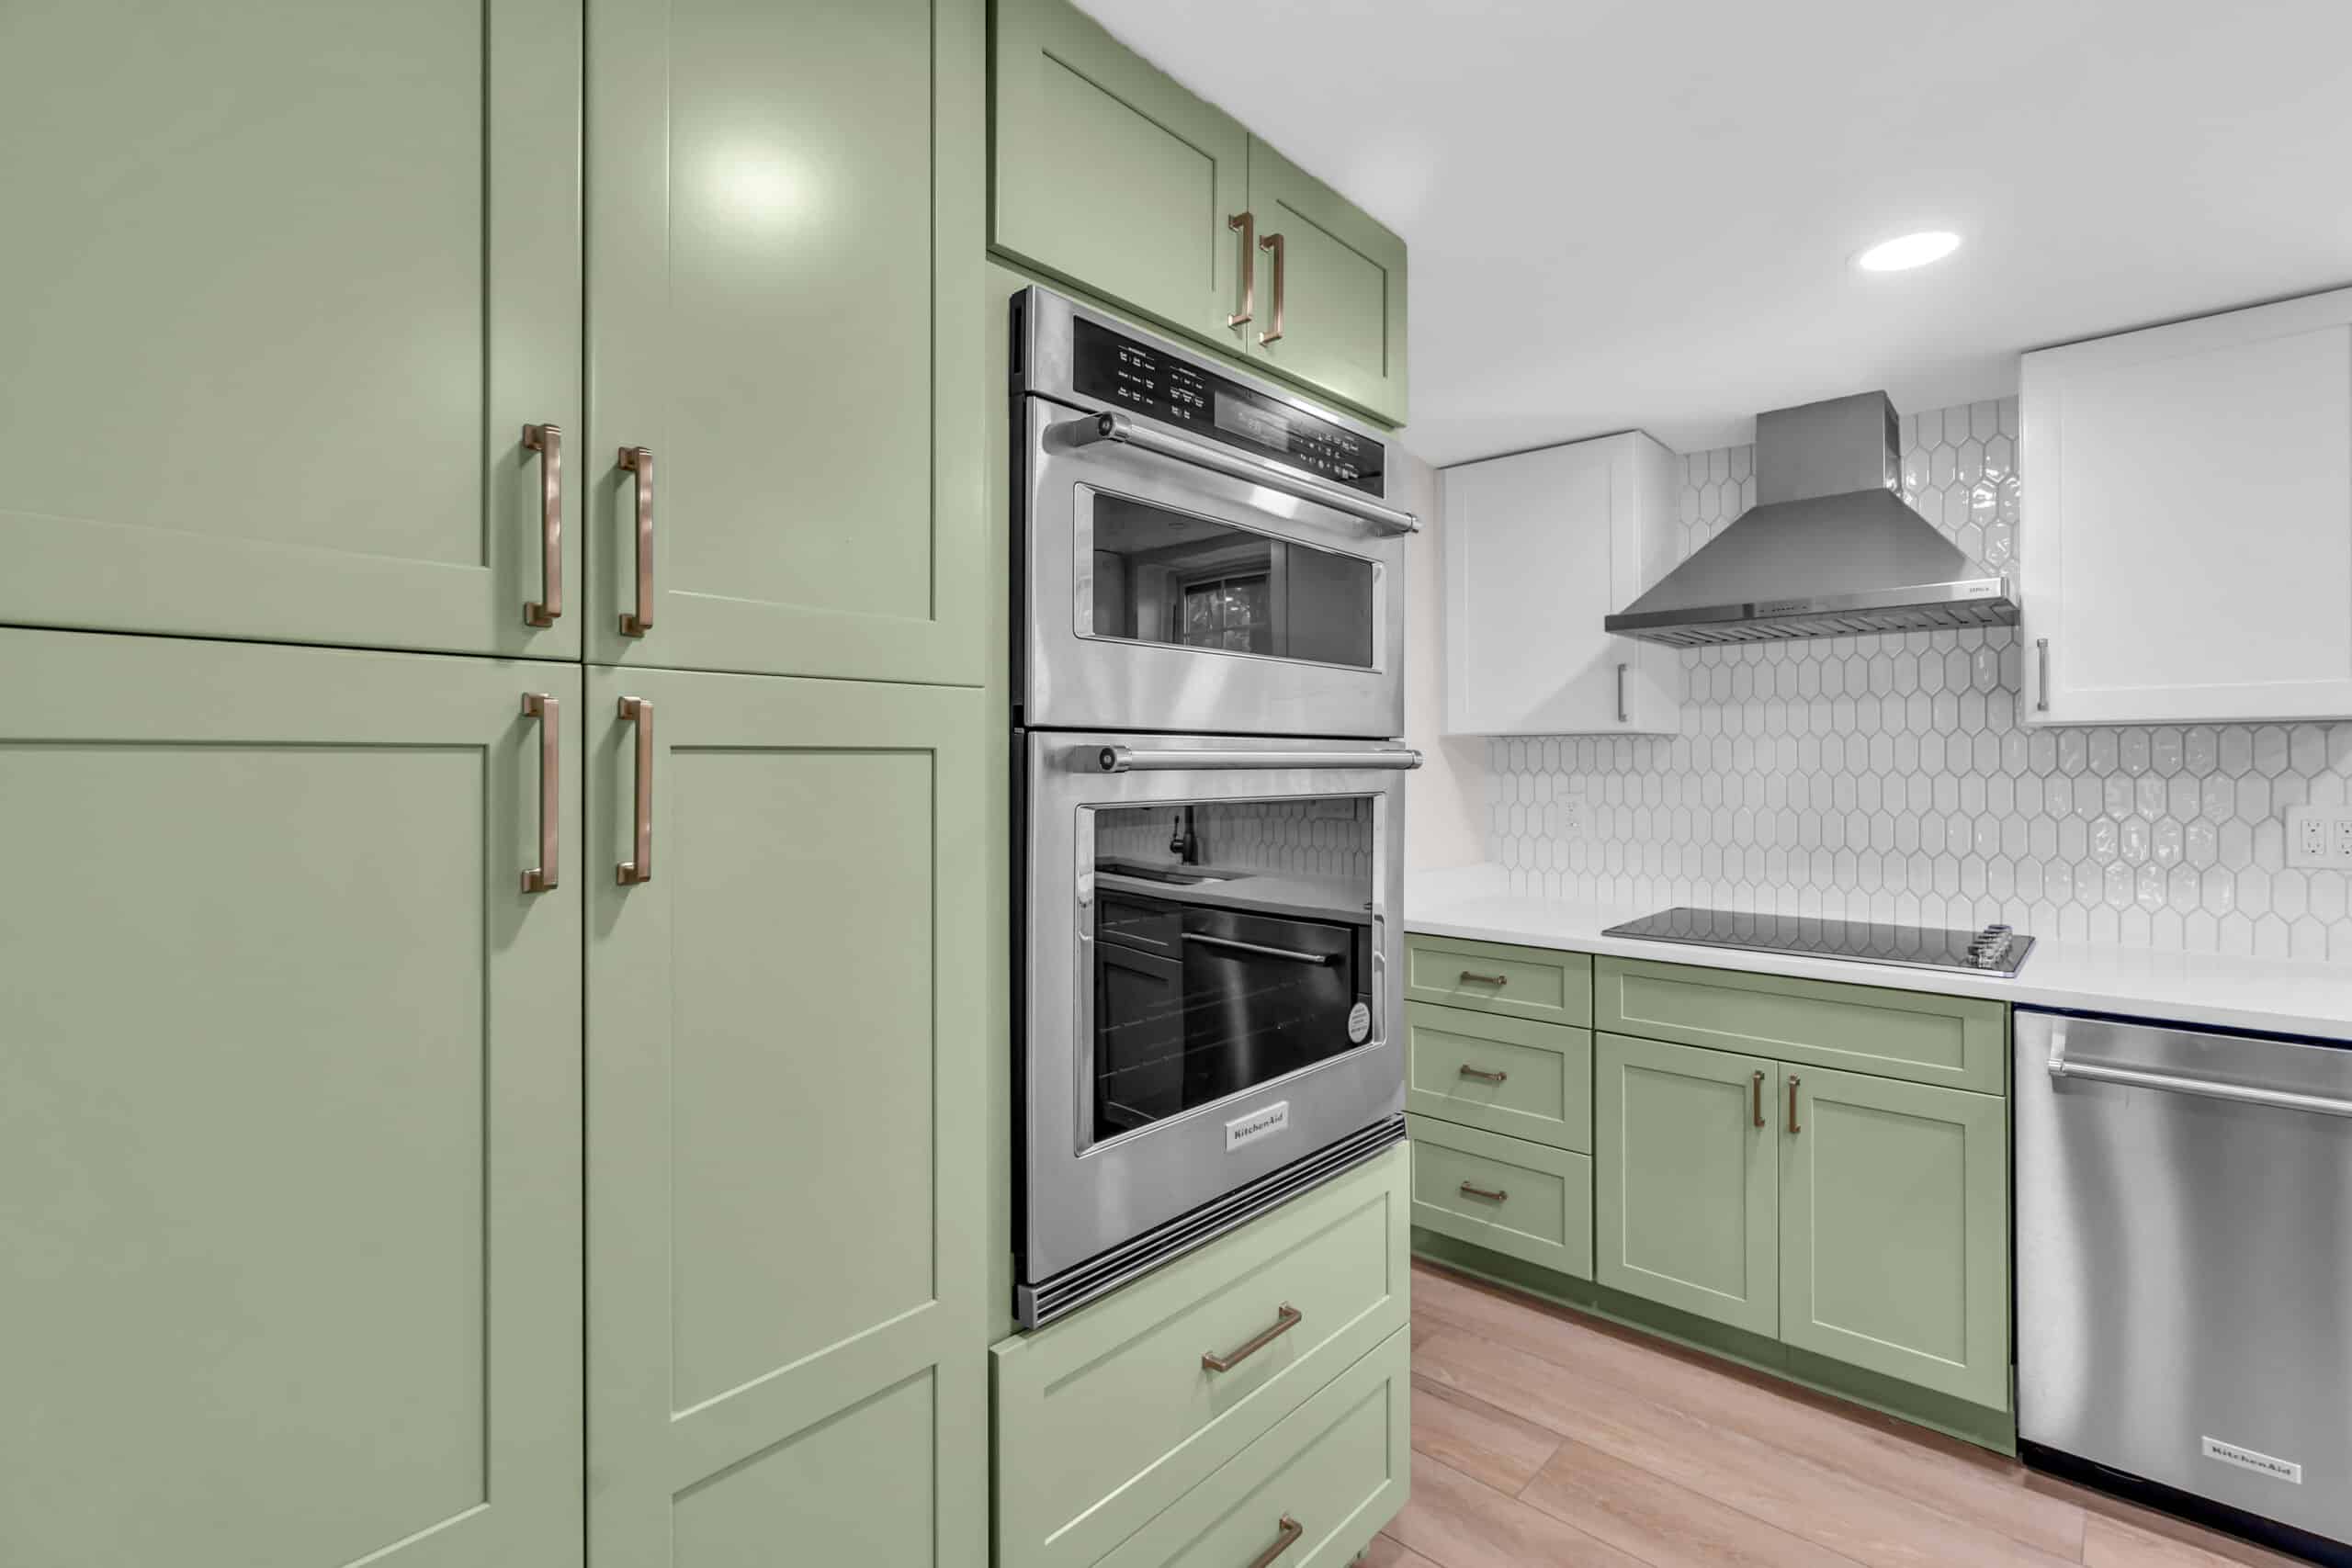 Deluxe white and green kitchen with shaker style cabinets